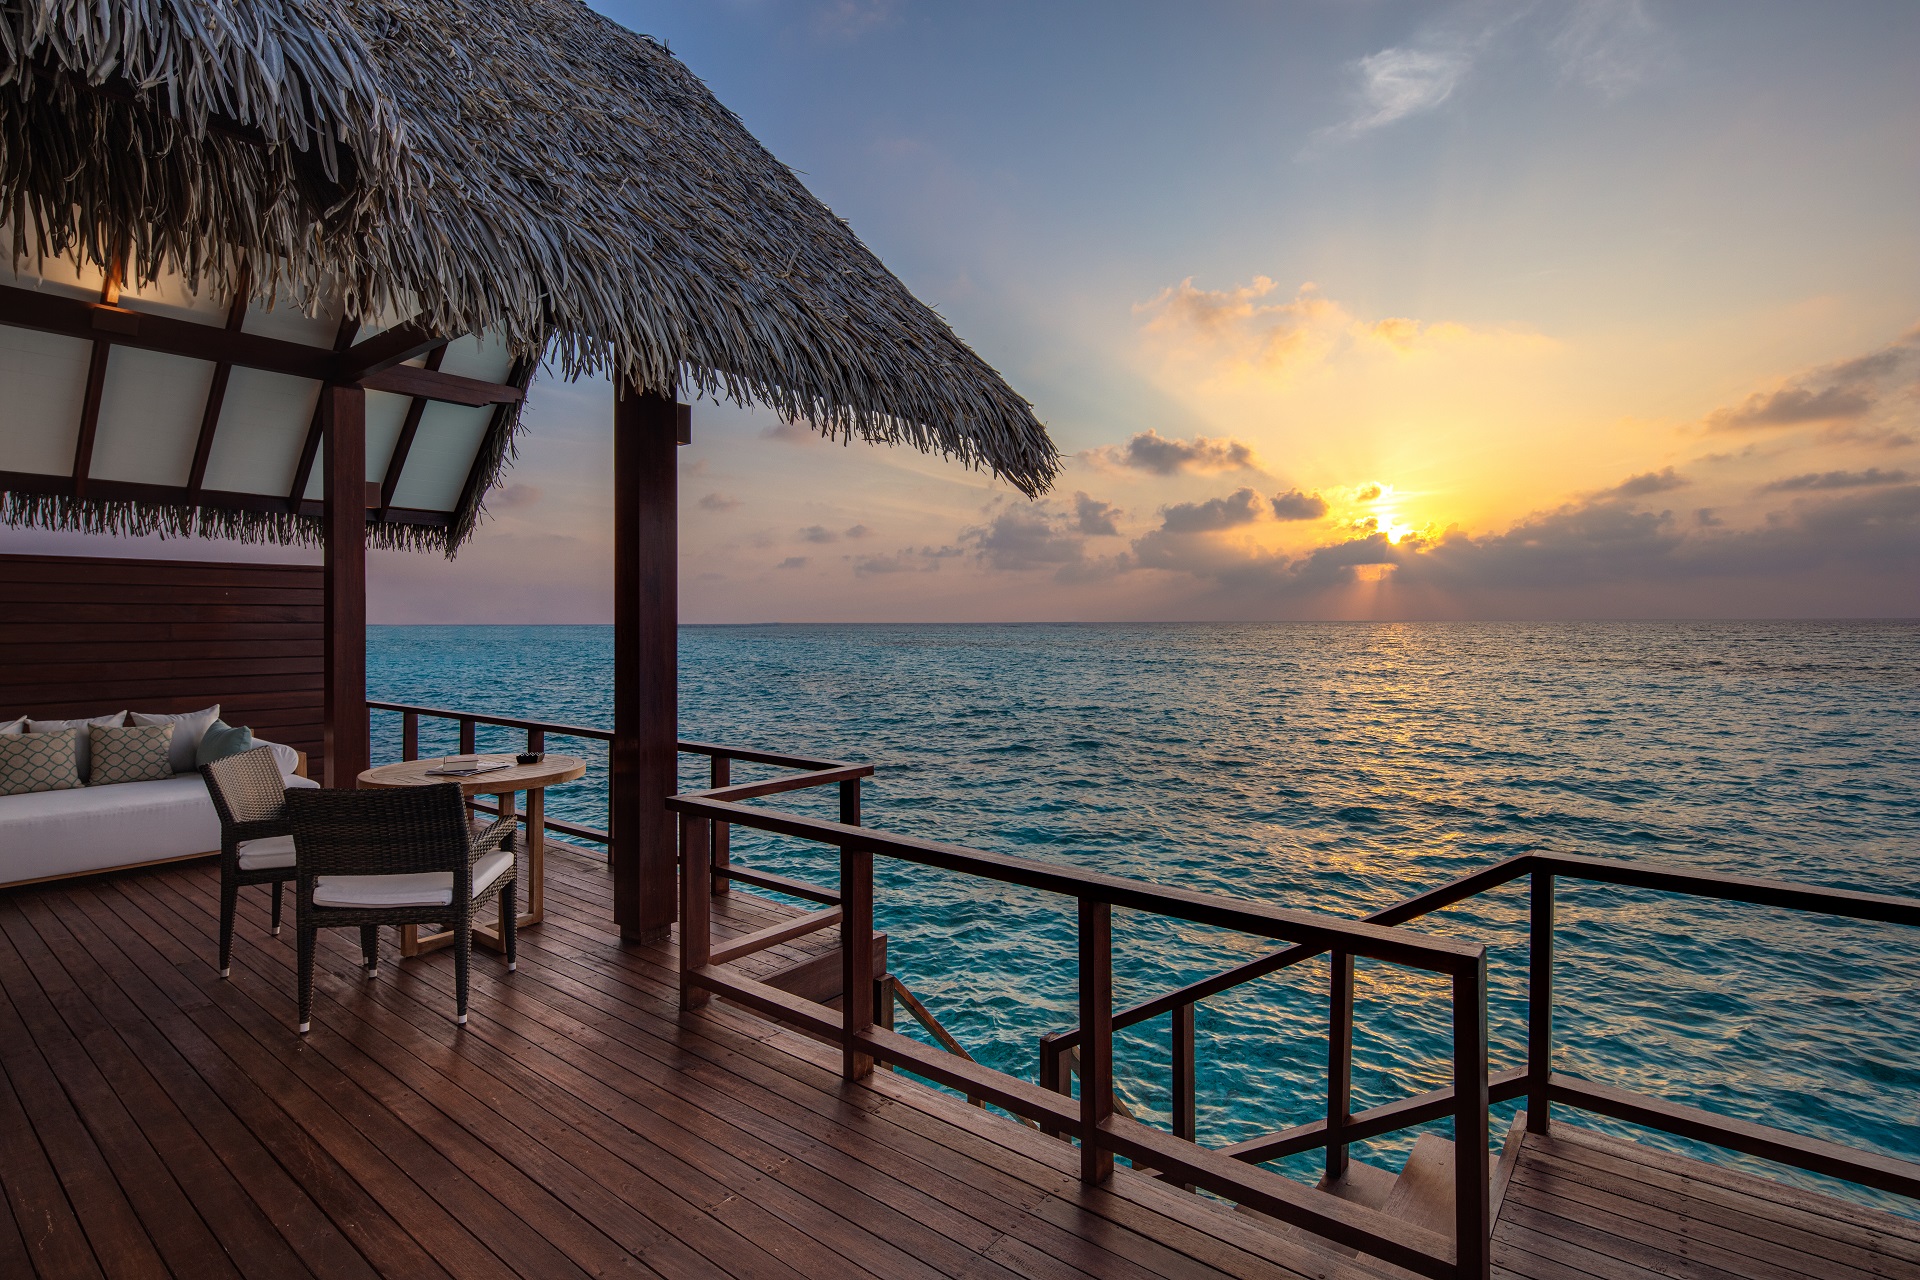 Wake up to the sound of the sea at the Heritance Aarah in the Maldives this October!